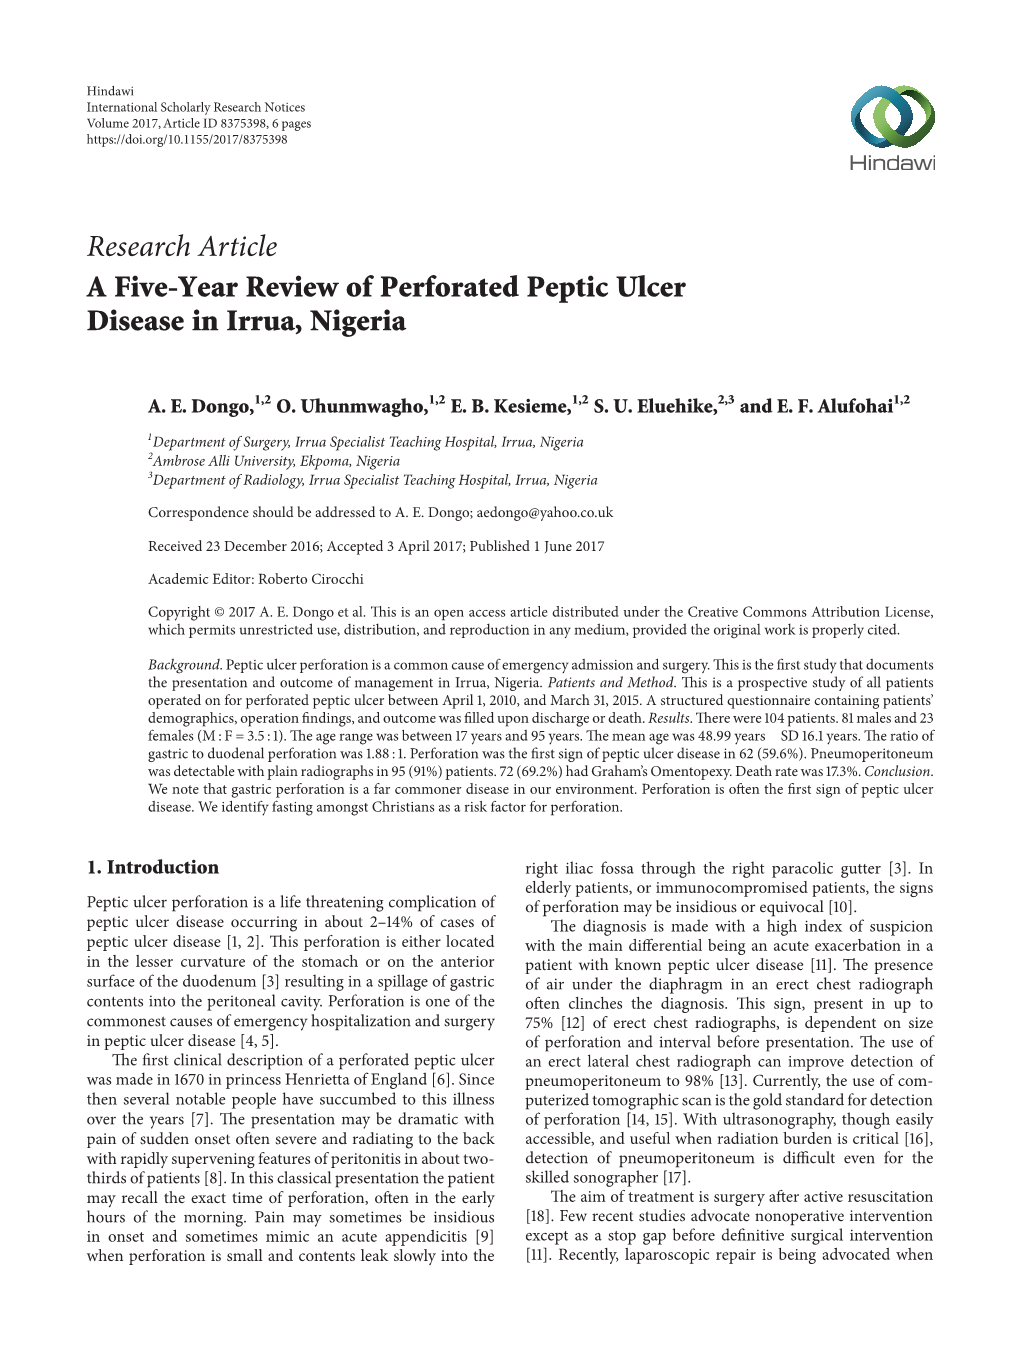 Research Article a Five-Year Review of Perforated Peptic Ulcer Disease in Irrua, Nigeria